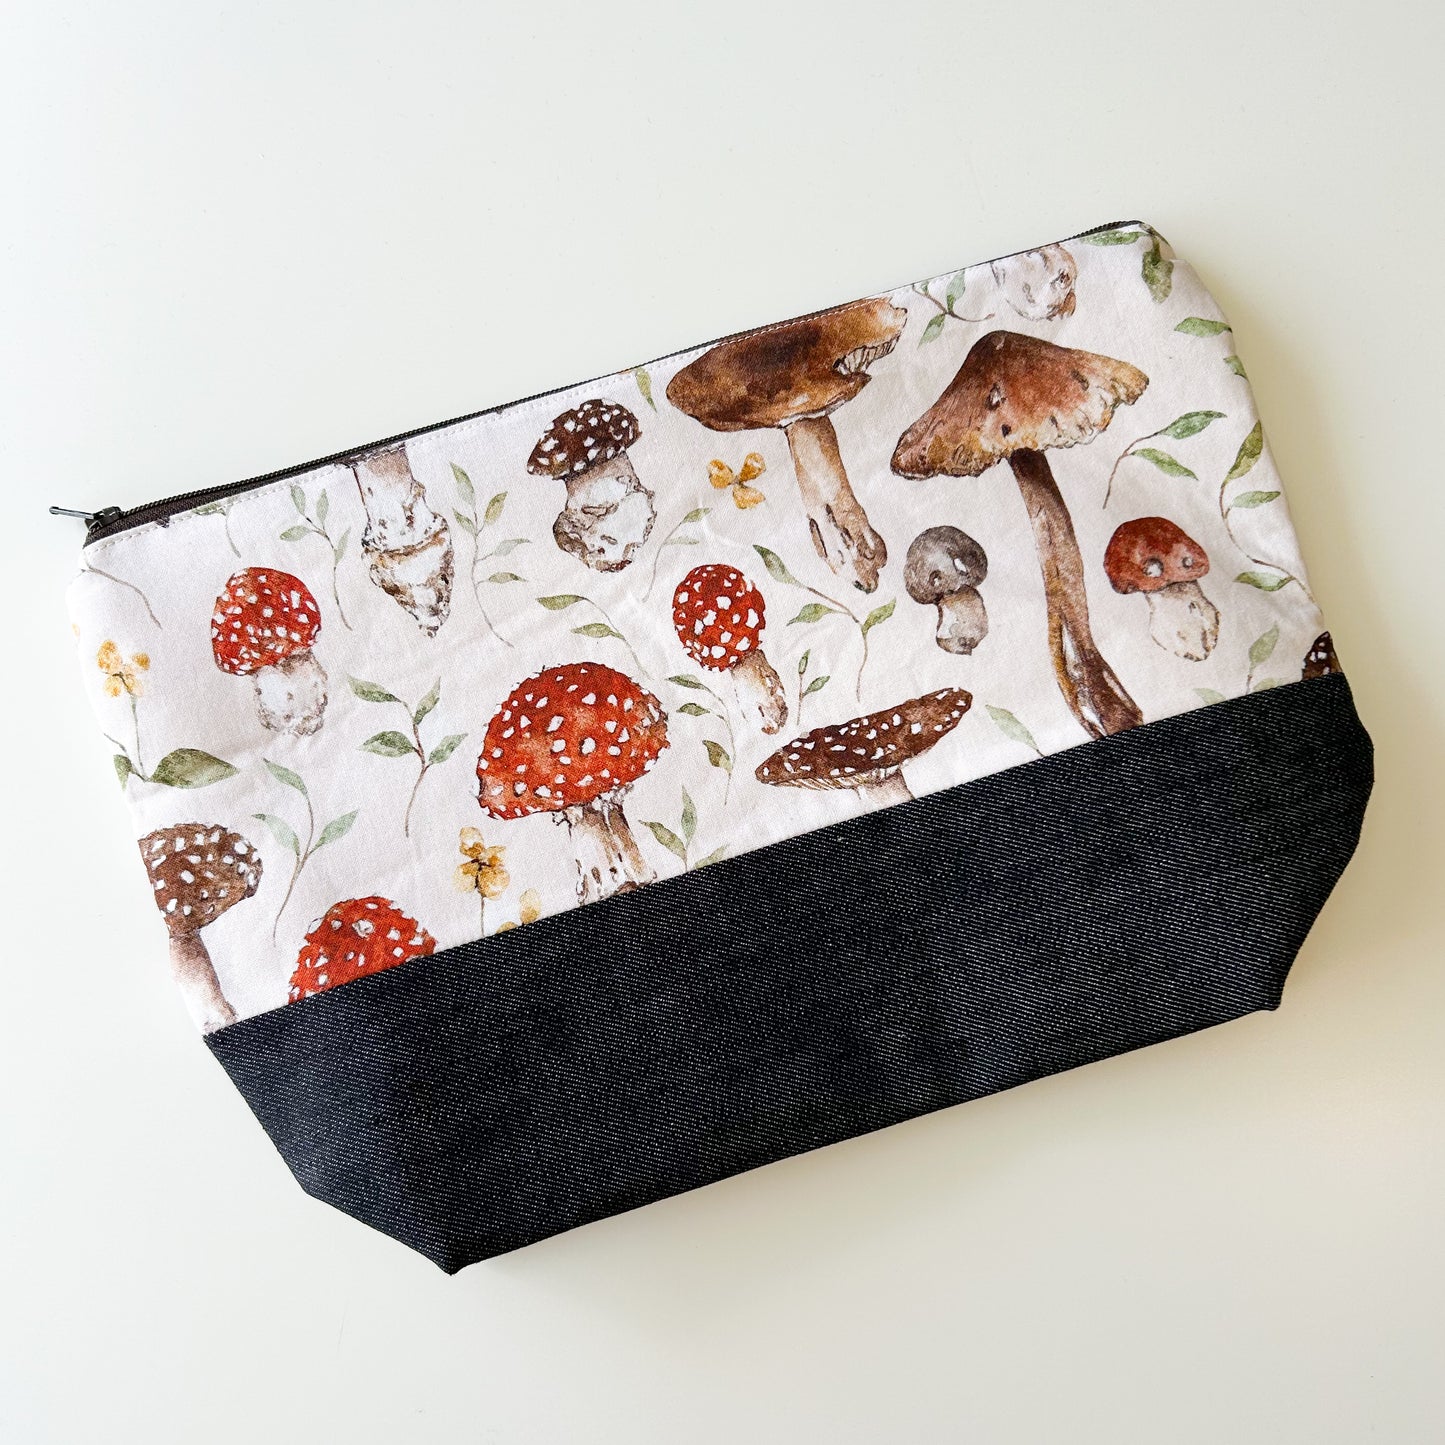 Denim - Small Zippered Project Bag - Cream with Mushrooms